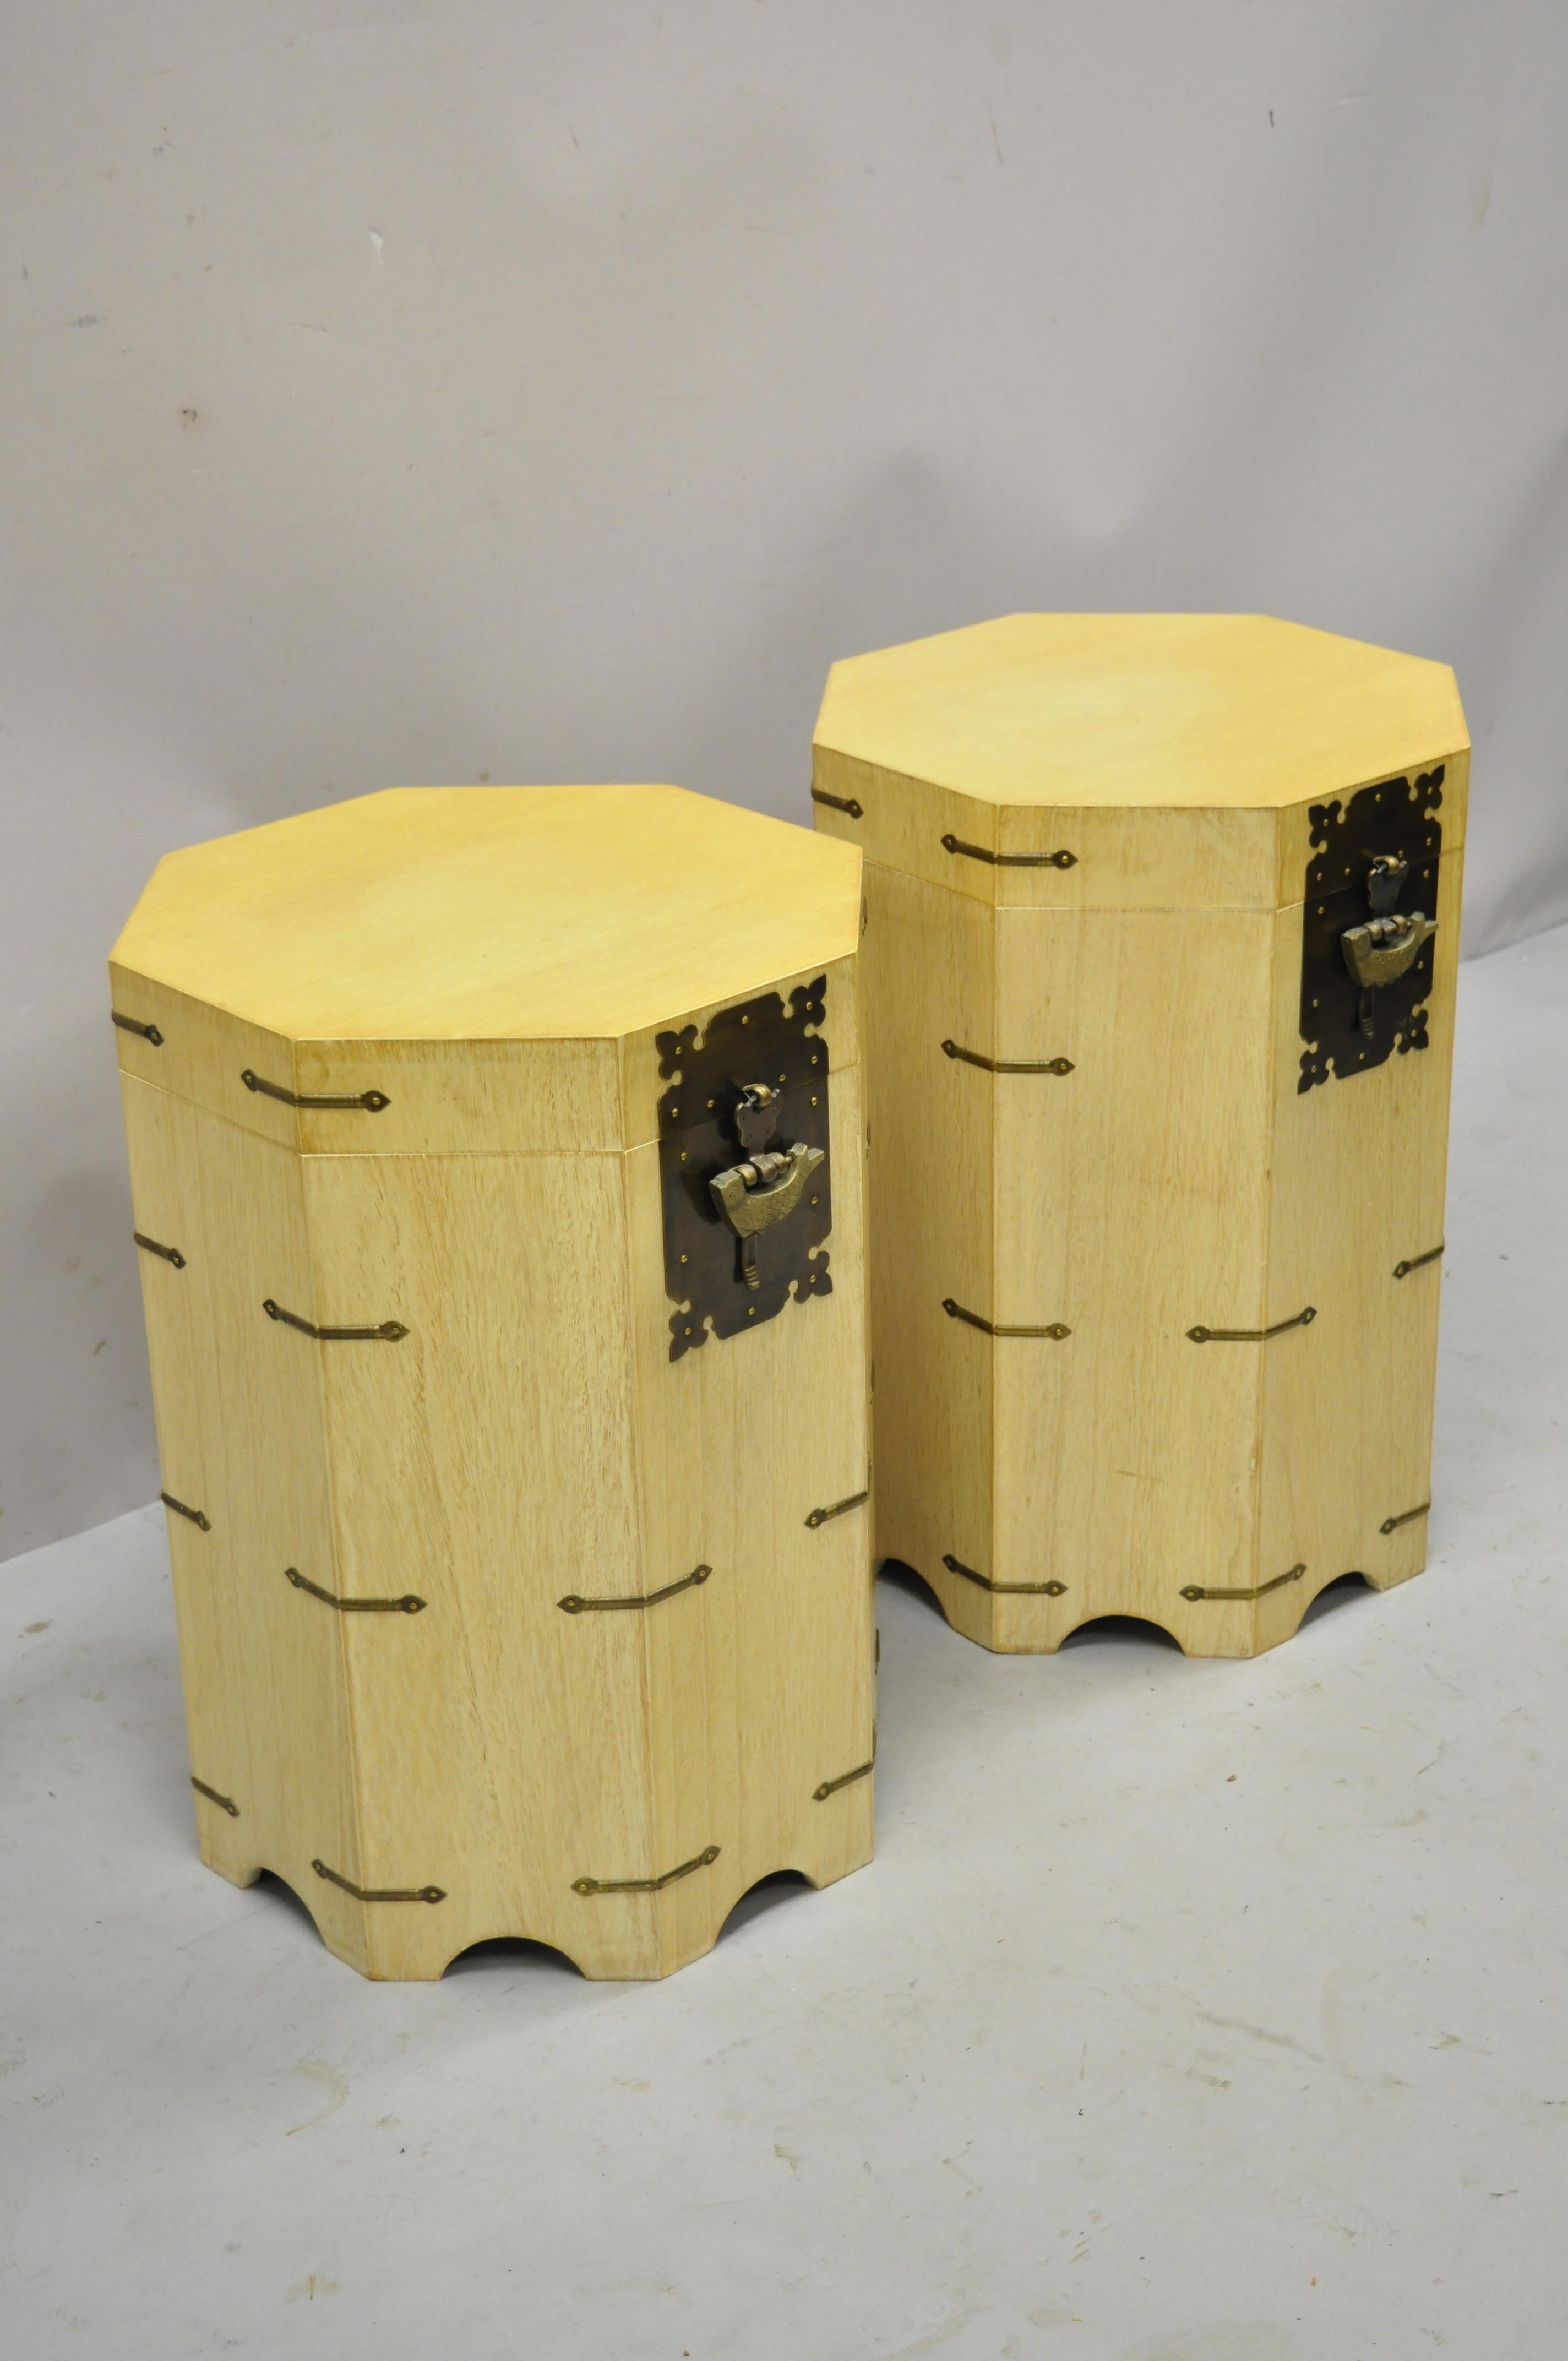 Vintage cerused mahogany Chinese storage chest trunk octagonal side tables - a pair. Item features cerused mahogany finish brass accents, lift top with decorated interior, brass fish locks on both trunks, working lock and key, very nice vintage